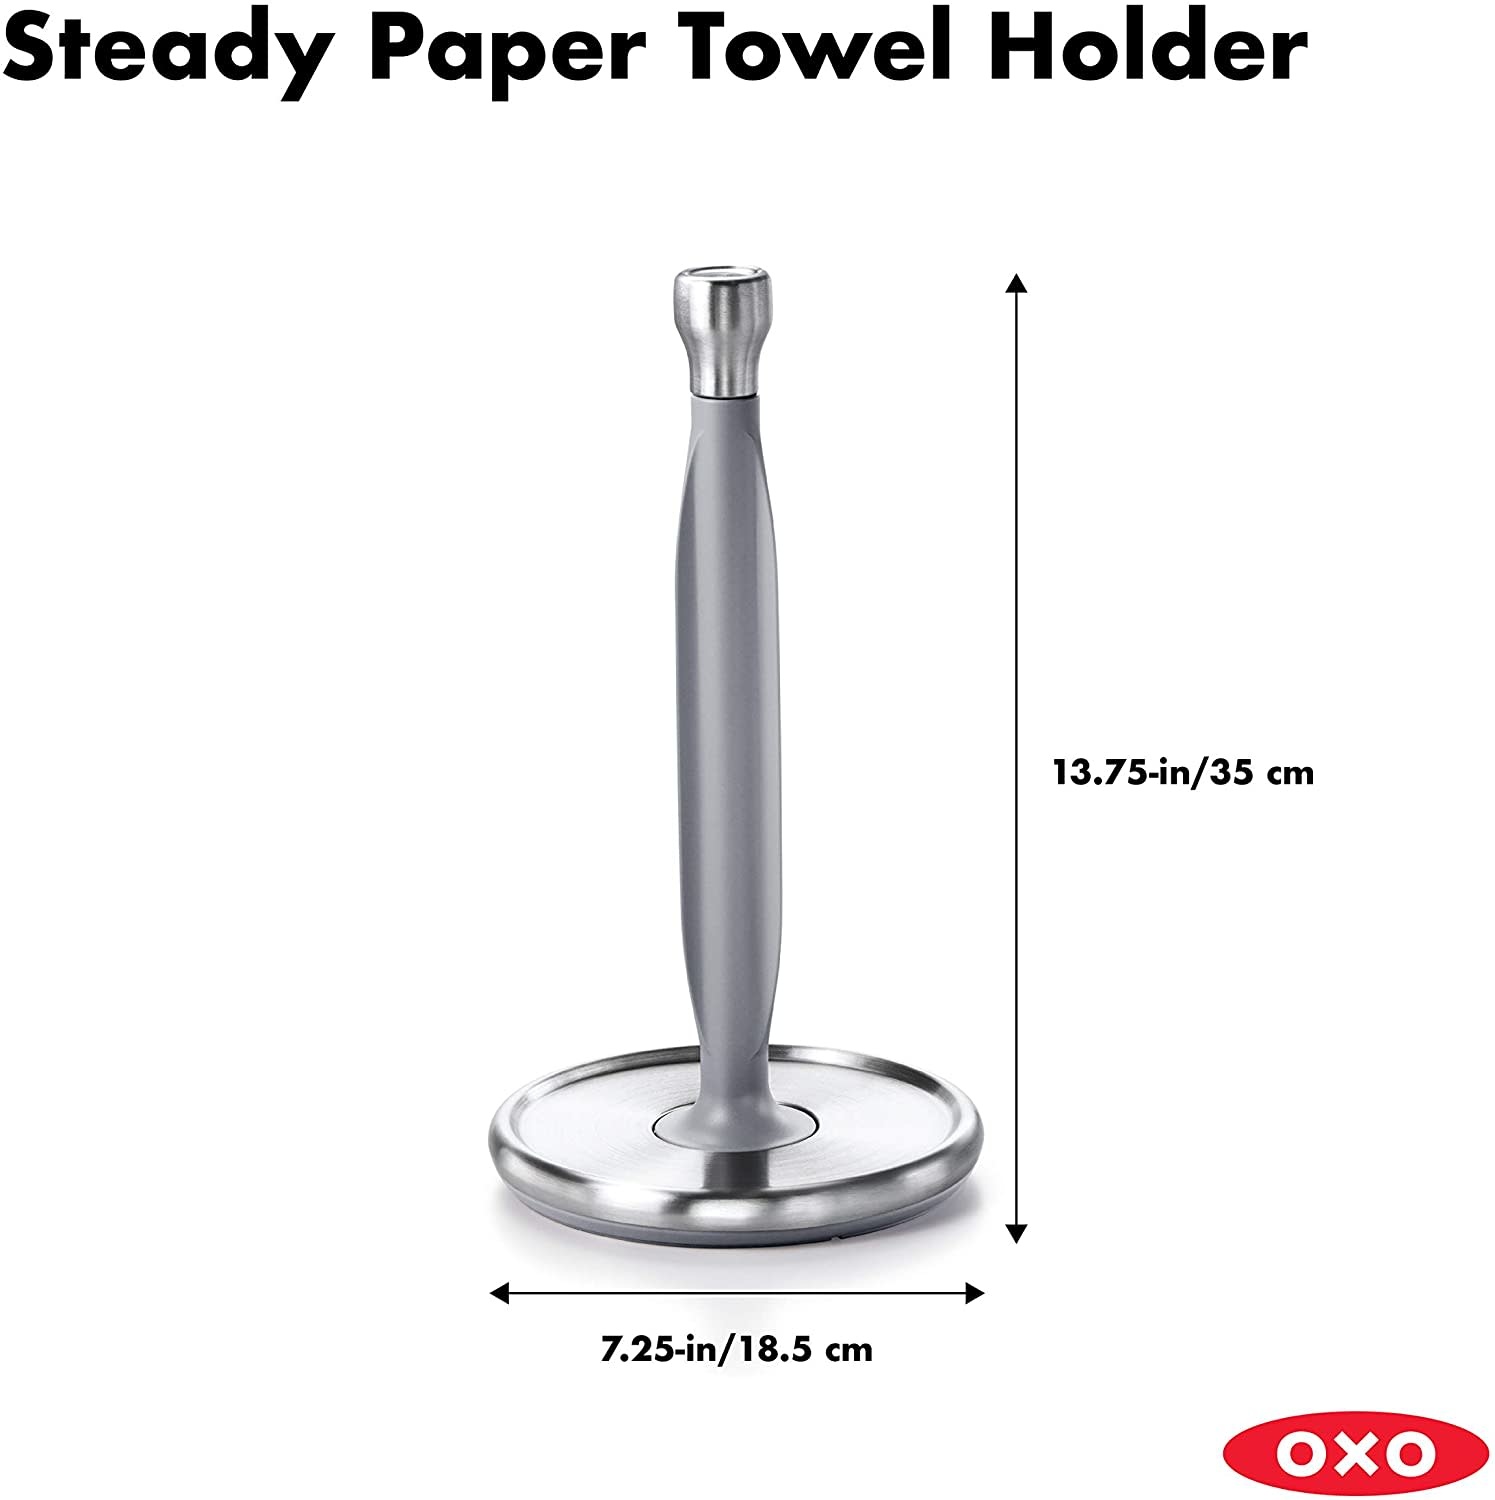 Steady Paper Towel Holder, OXO